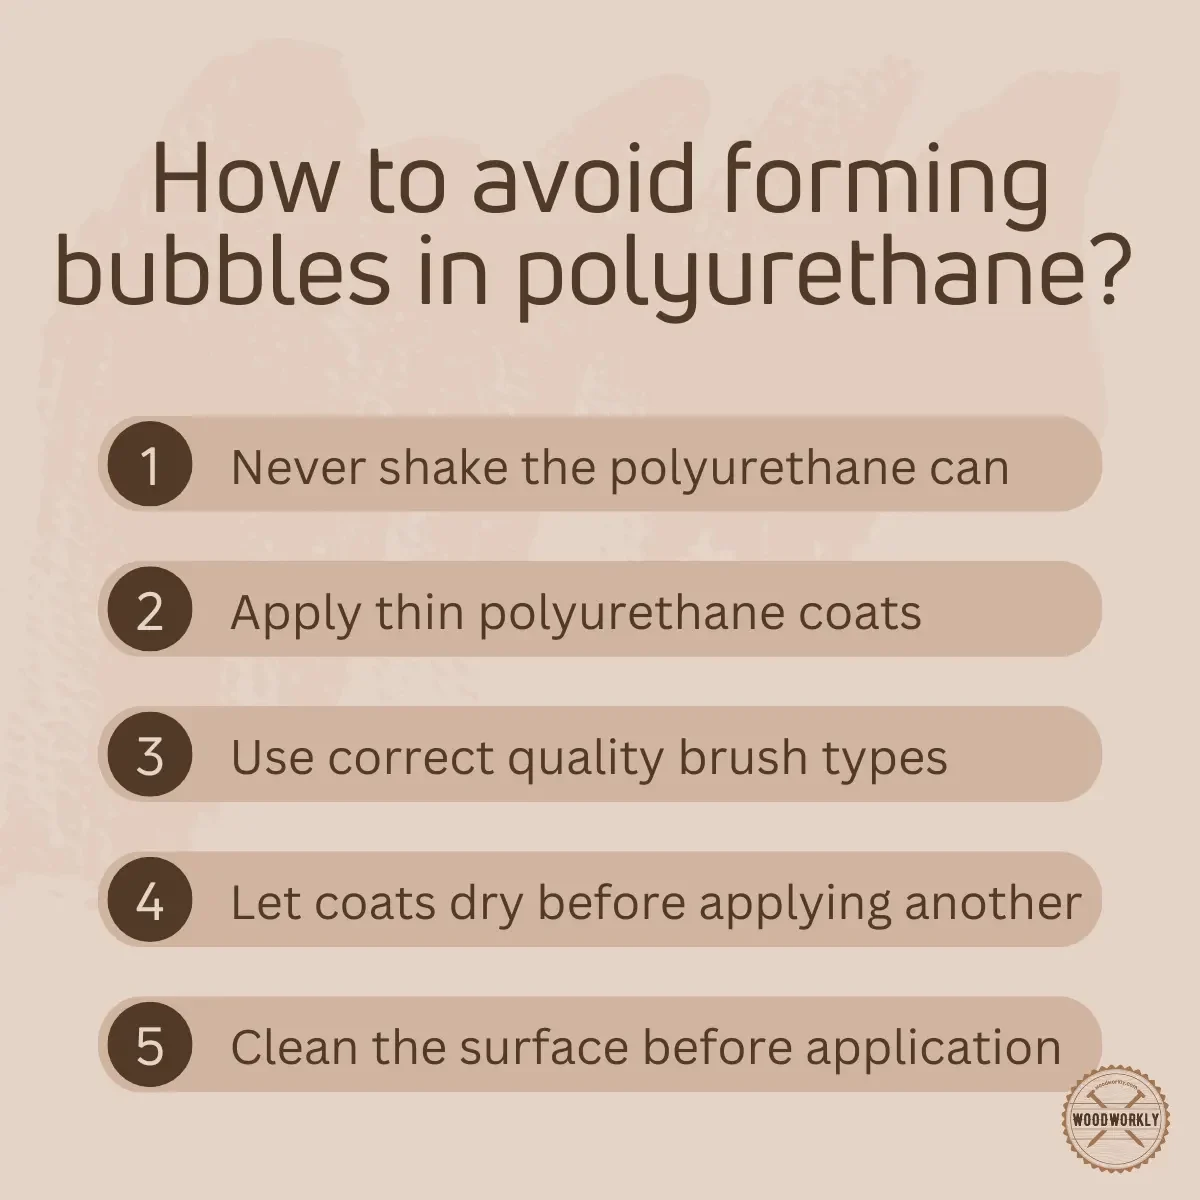 How to avoid forming bubbles in polyurethane